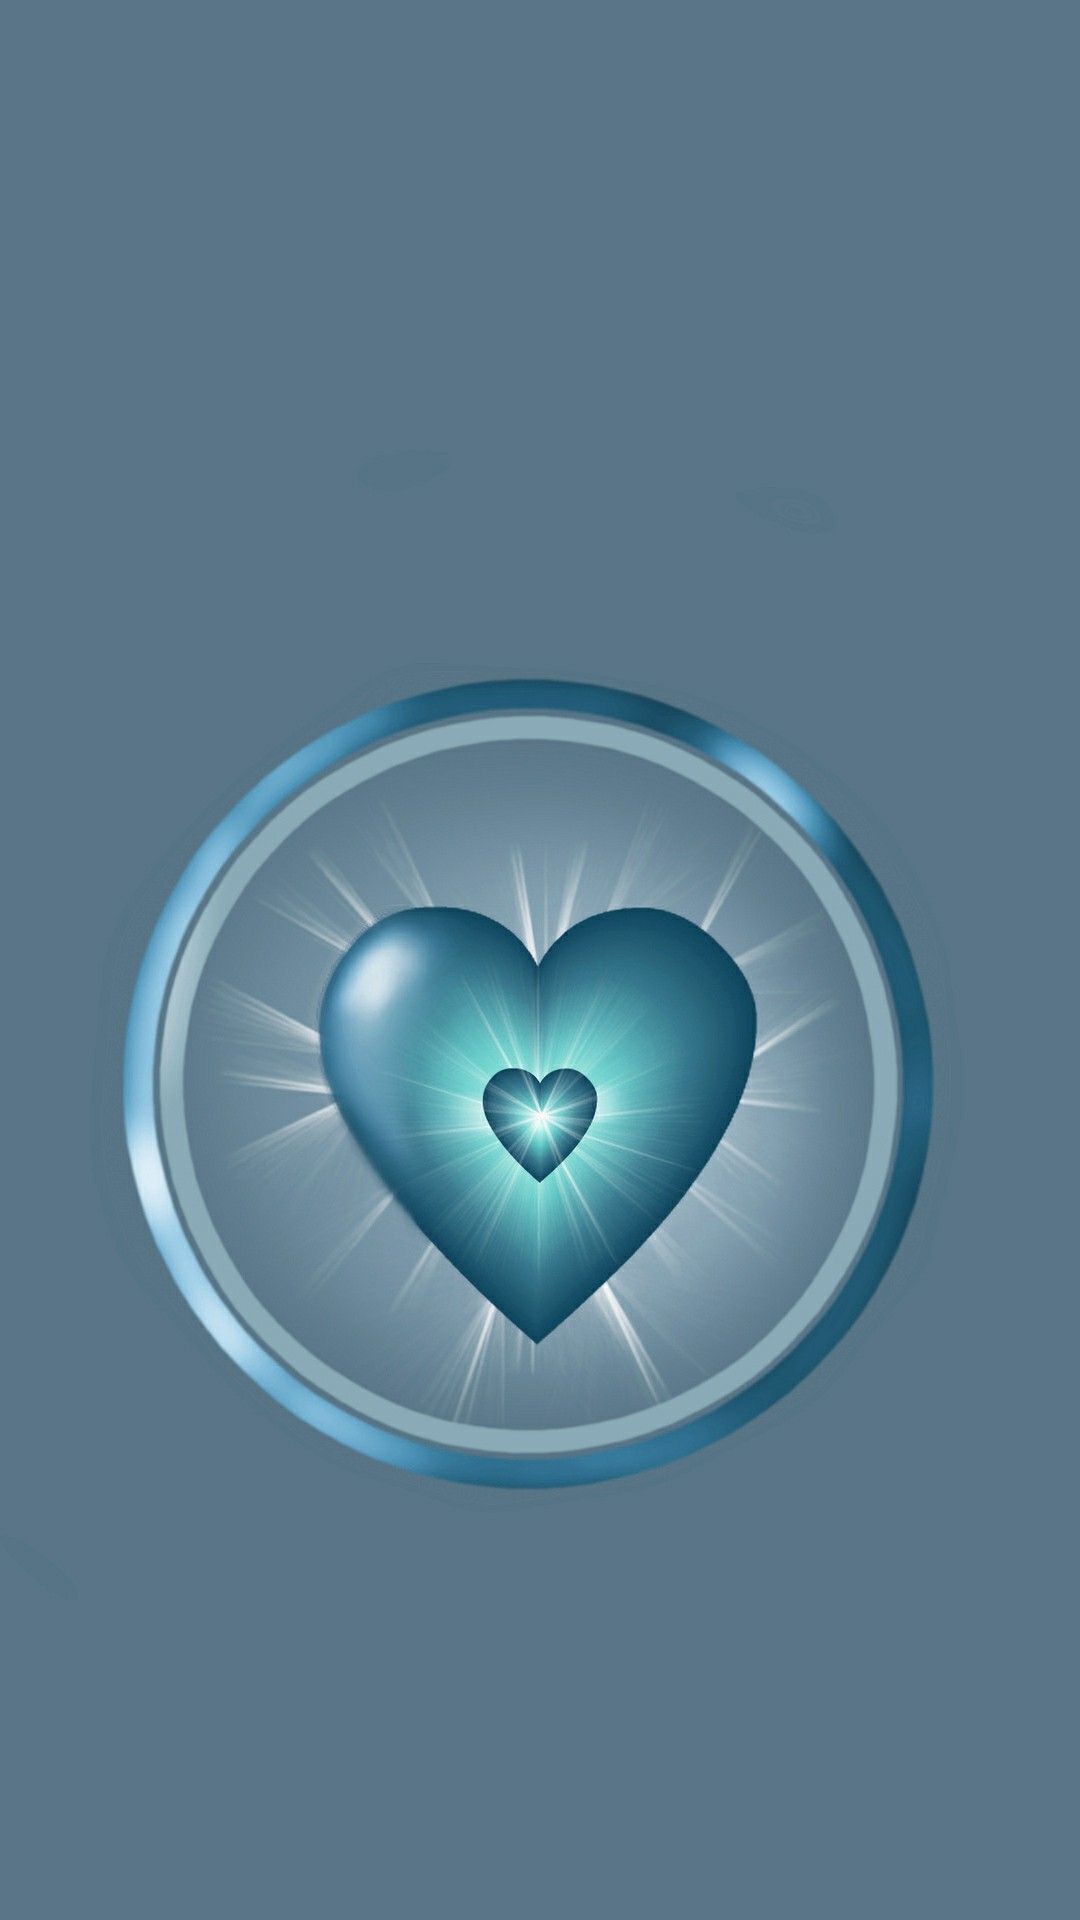 Blue Heart in a Circle Wallpaper.By Artist Unknown. Heart wallpaper, Pretty phone wallpaper, Butterfly picture